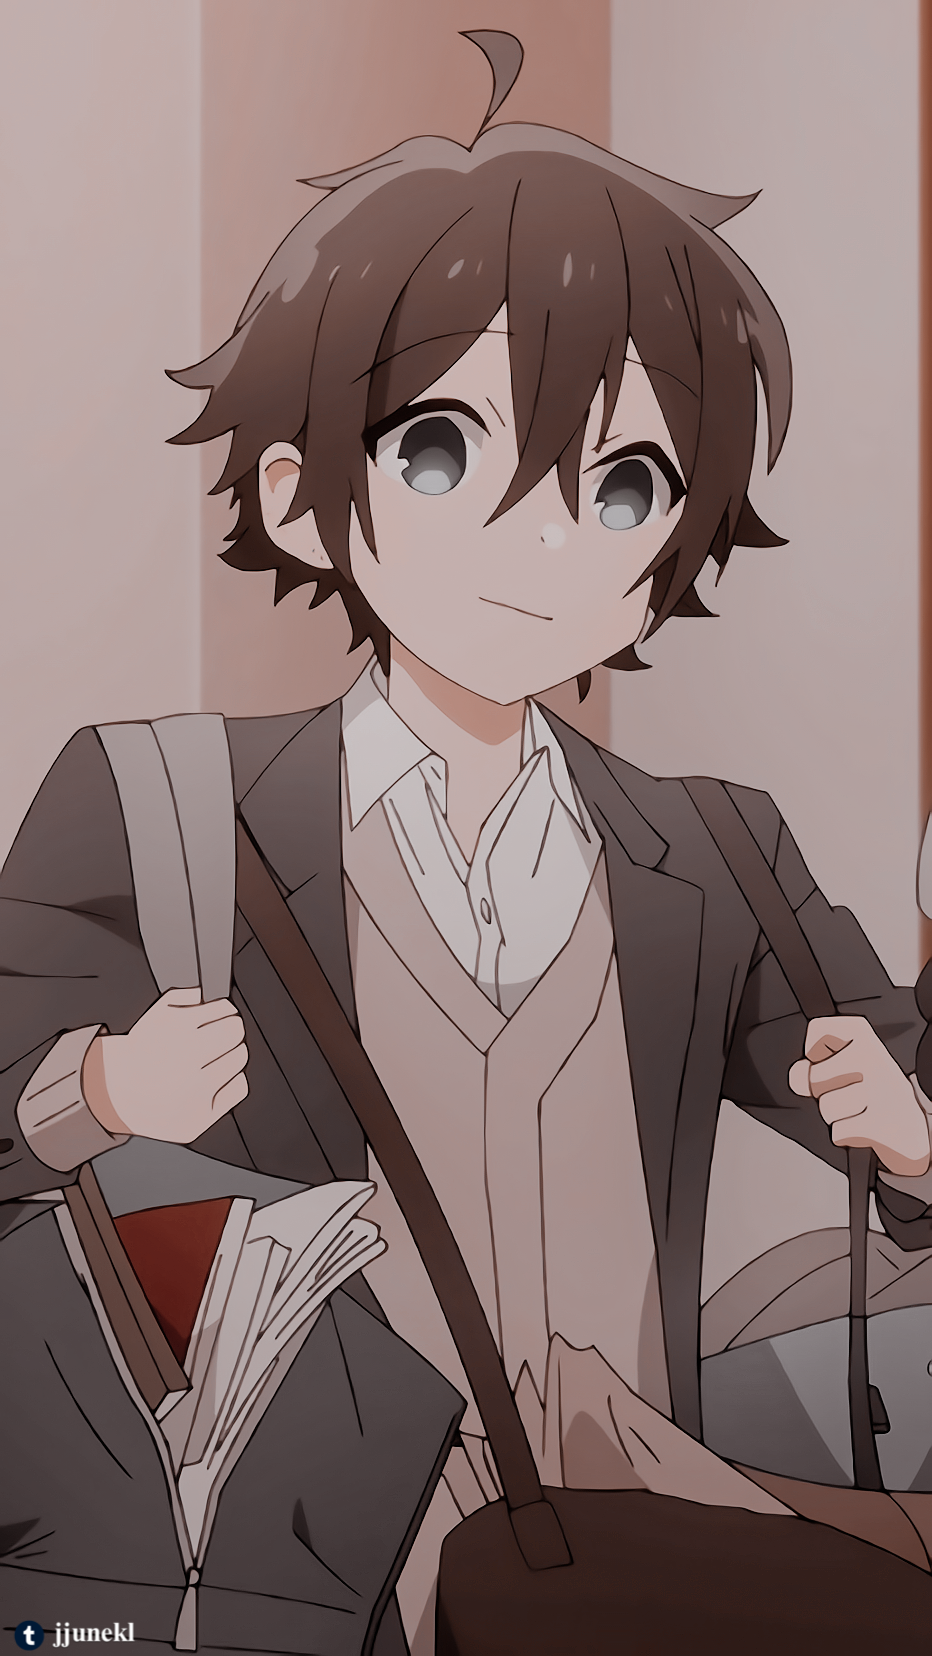 Peach on X: There are 10 different phone wallpapers, click below. I hope  you find one you like~ Tumblr will always have all images in HD if  downloaded properly  Anime: Horimiya